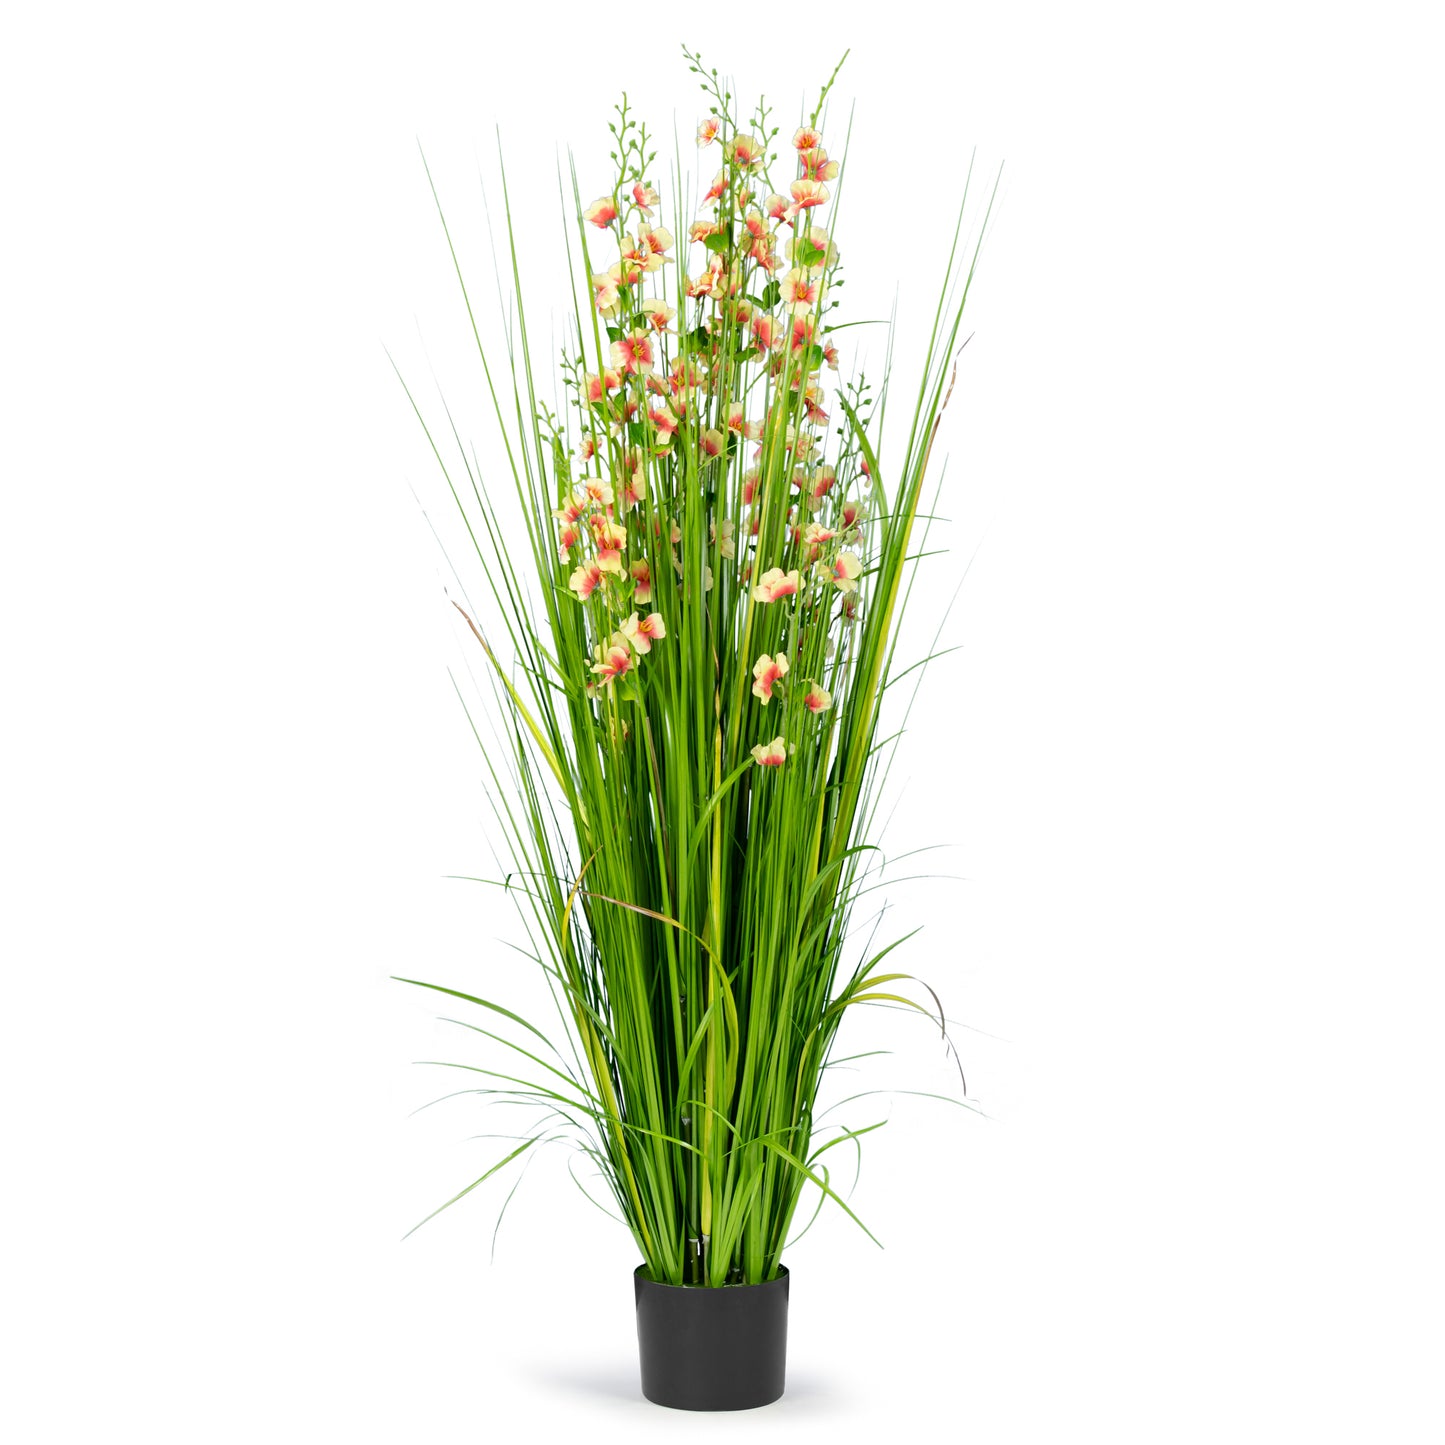 5 Feet High Artificial Reed with Decorative Yellow and Pink Flowers